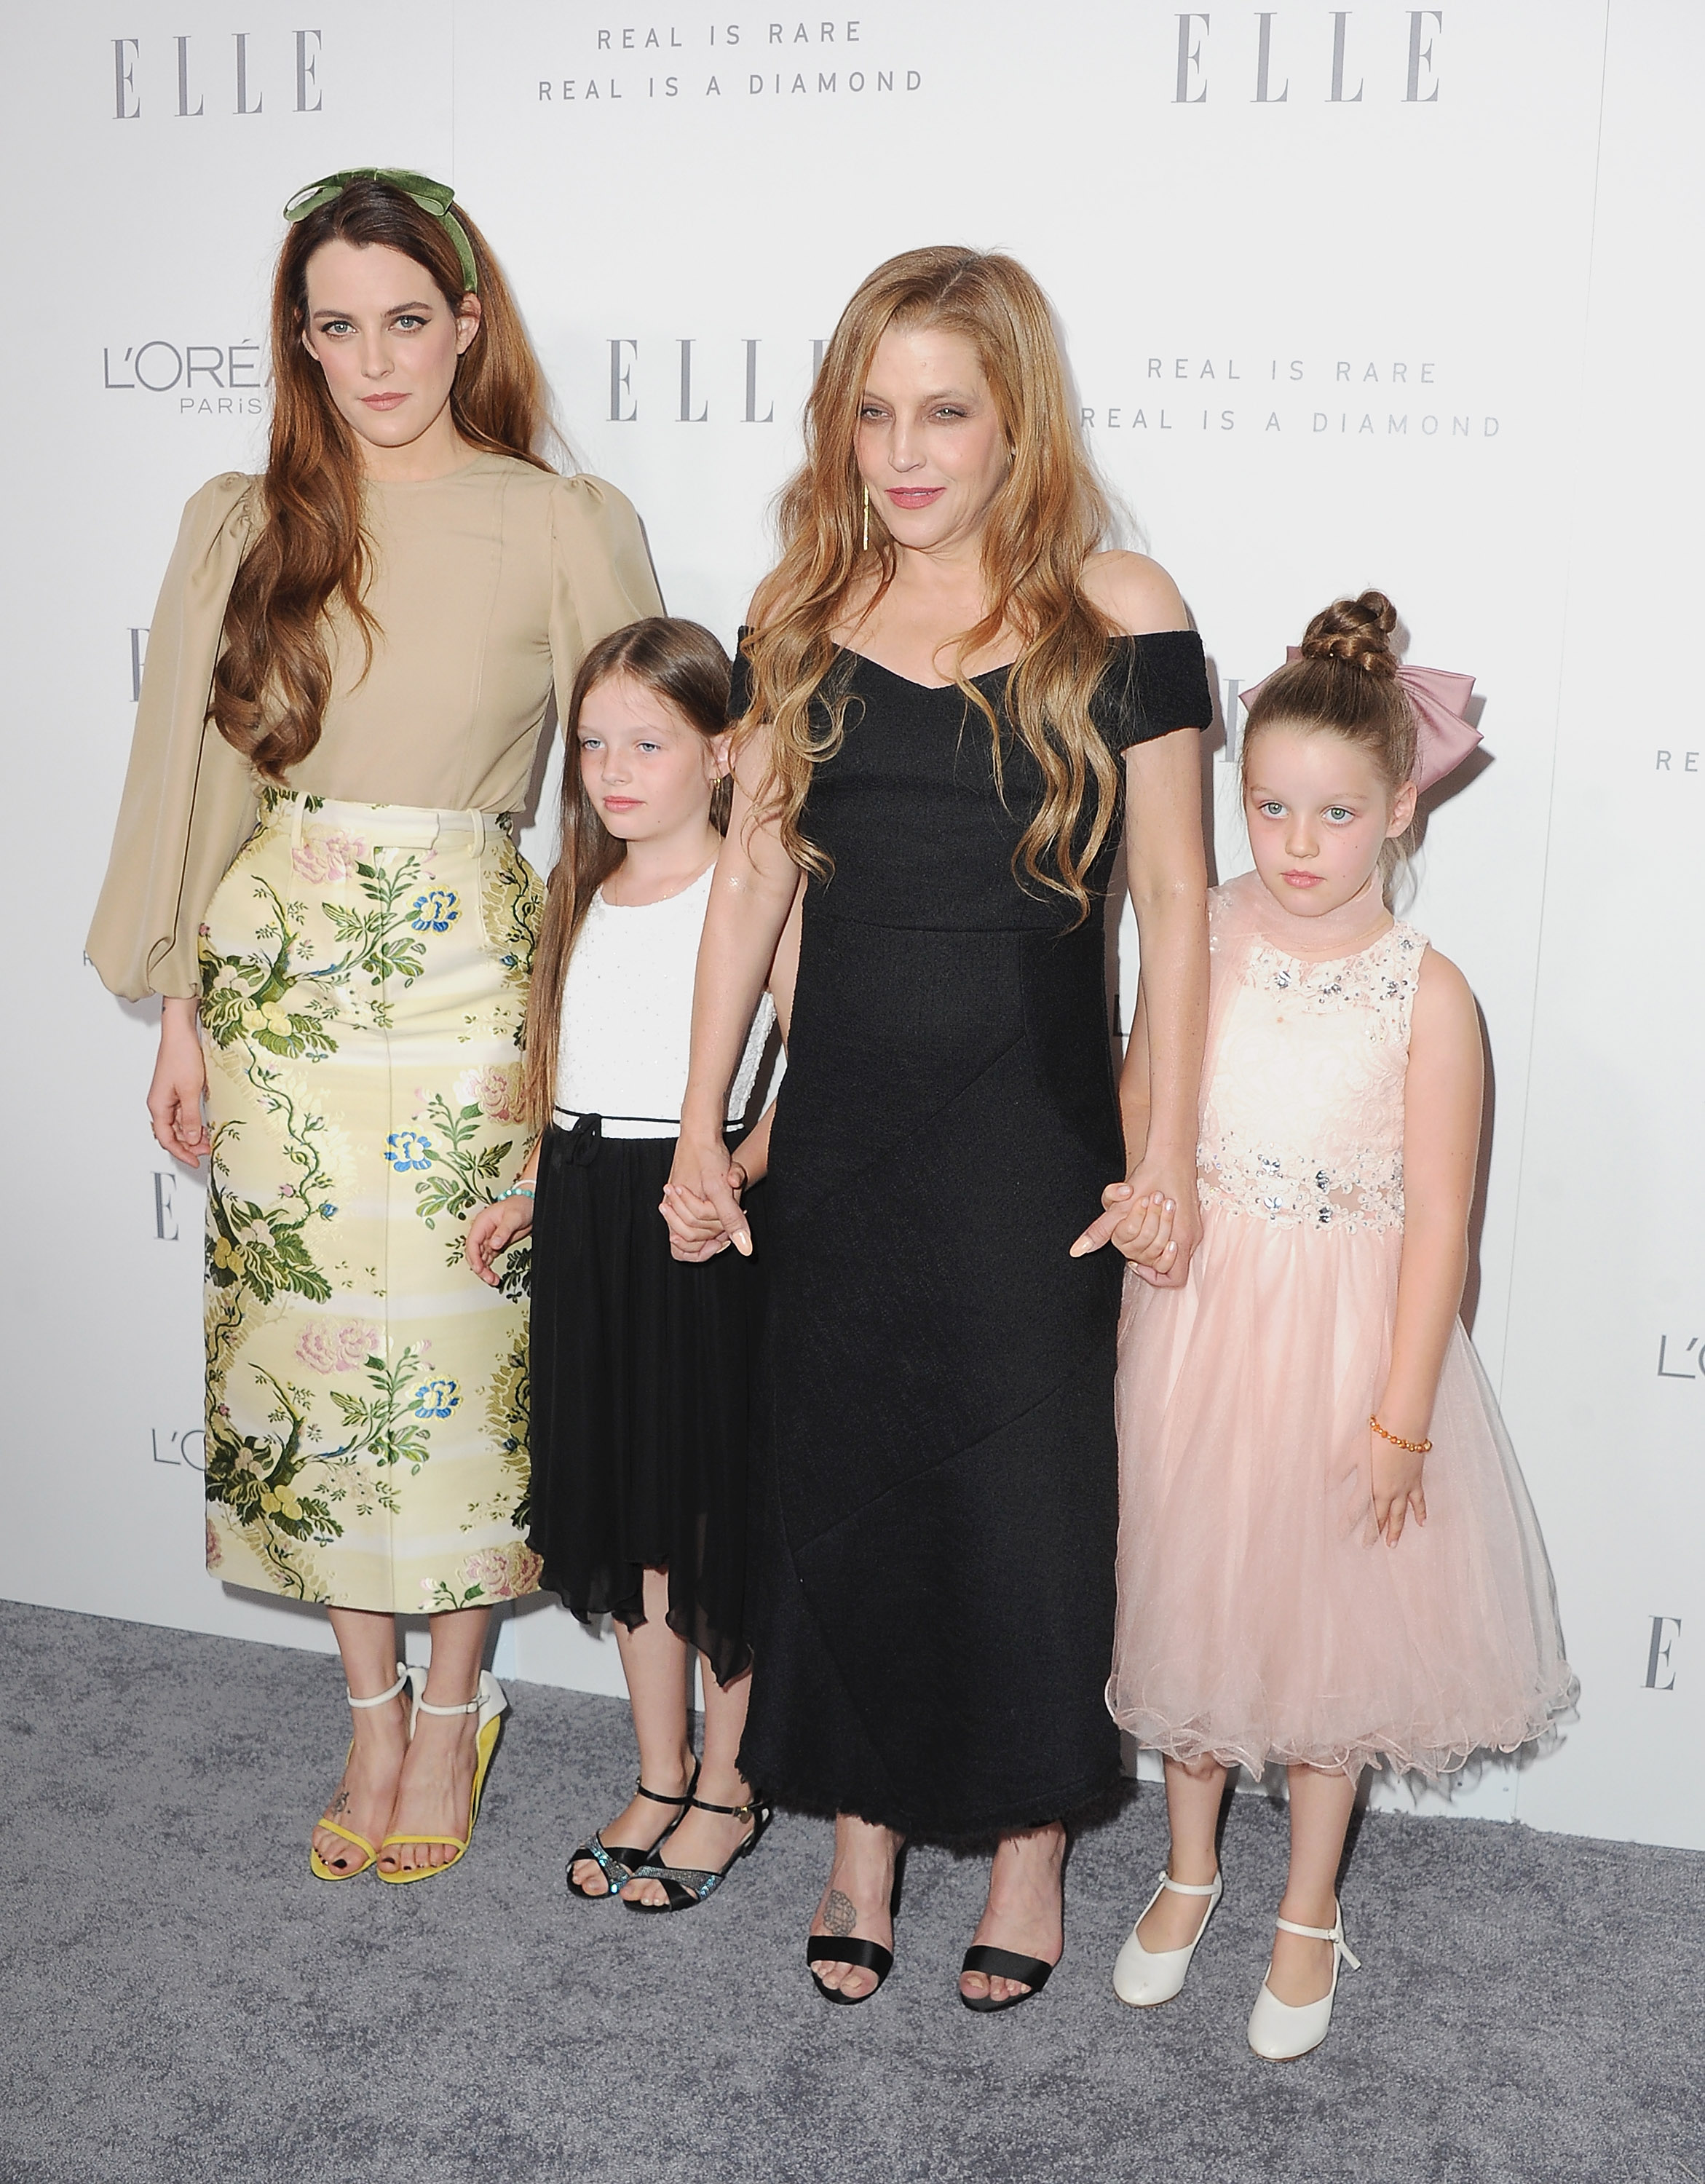 Lisa Marie Presley with her daughters, Riley, Harper, and Finley during ELLE's 24th Annual Women in Hollywood Celebration in Los Angeles, California on October 16, 2017 | Source: Getty Images